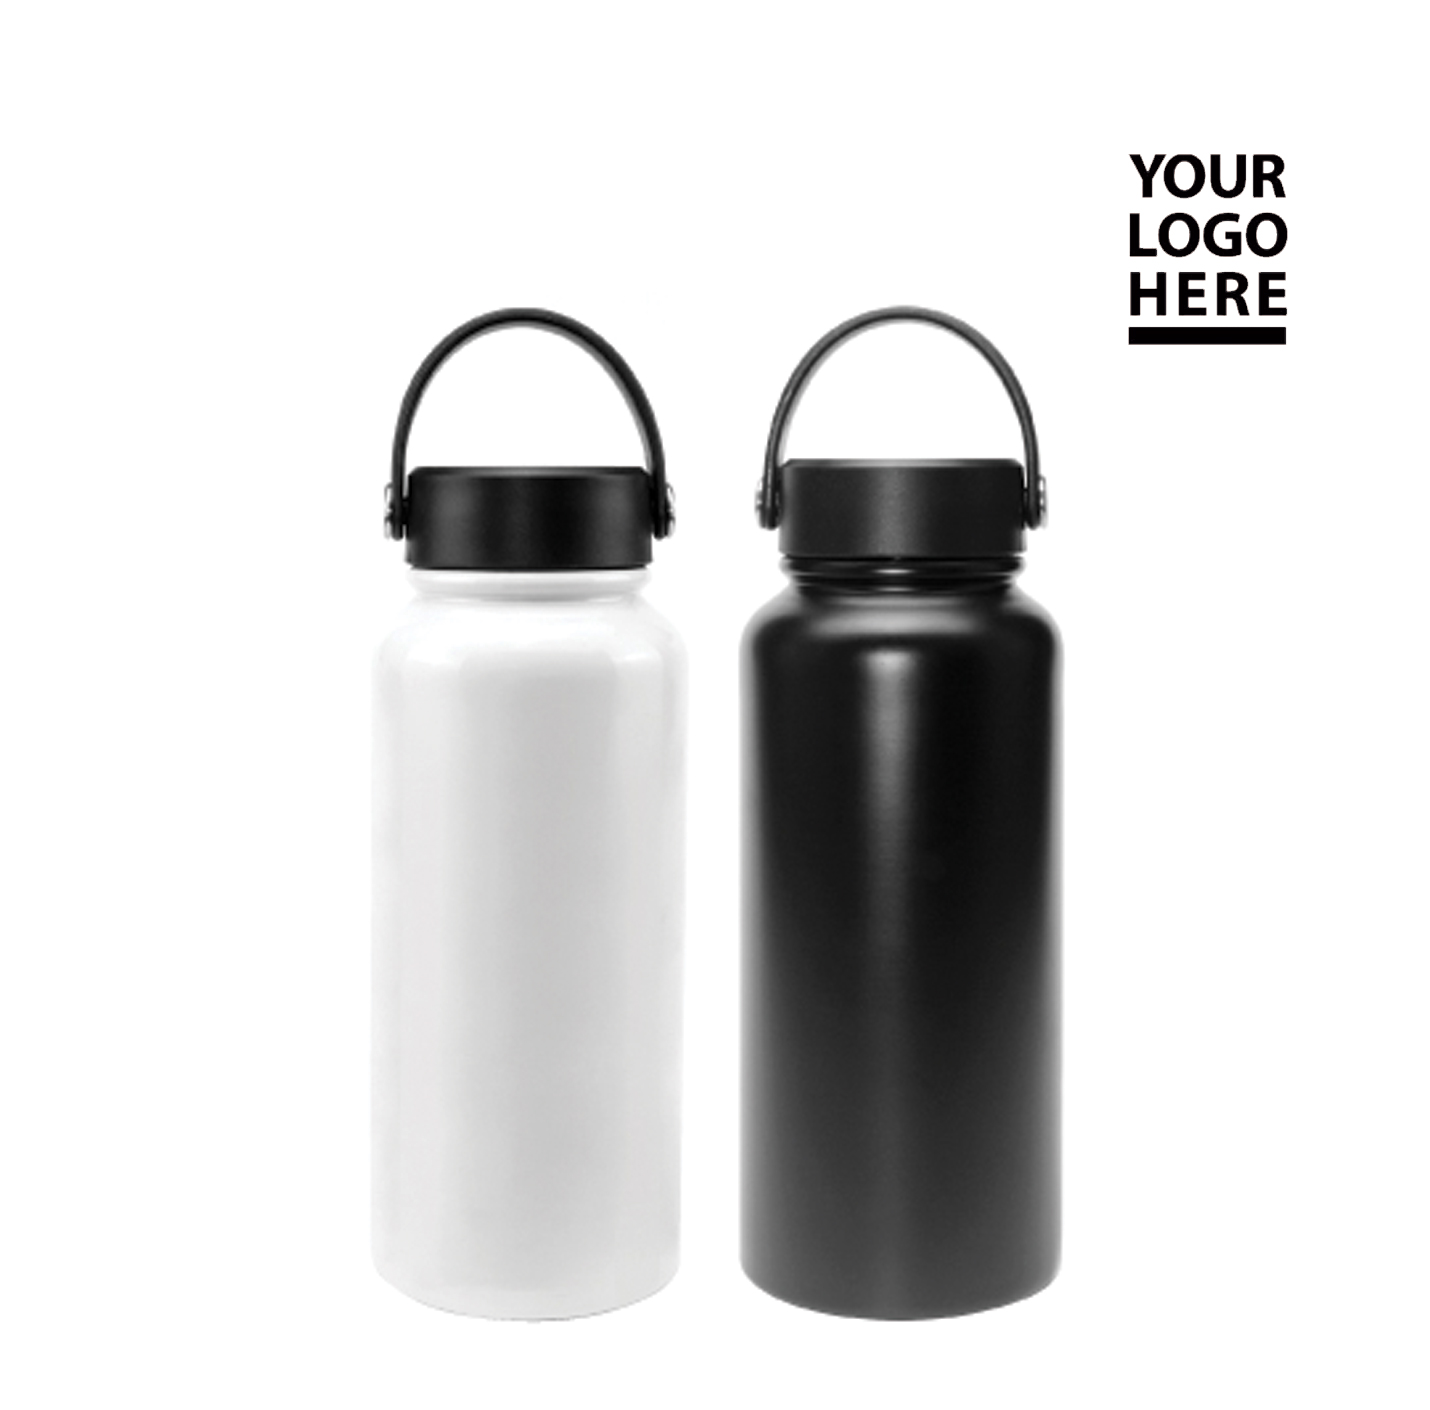 Double Wall Stainless Steel Flask